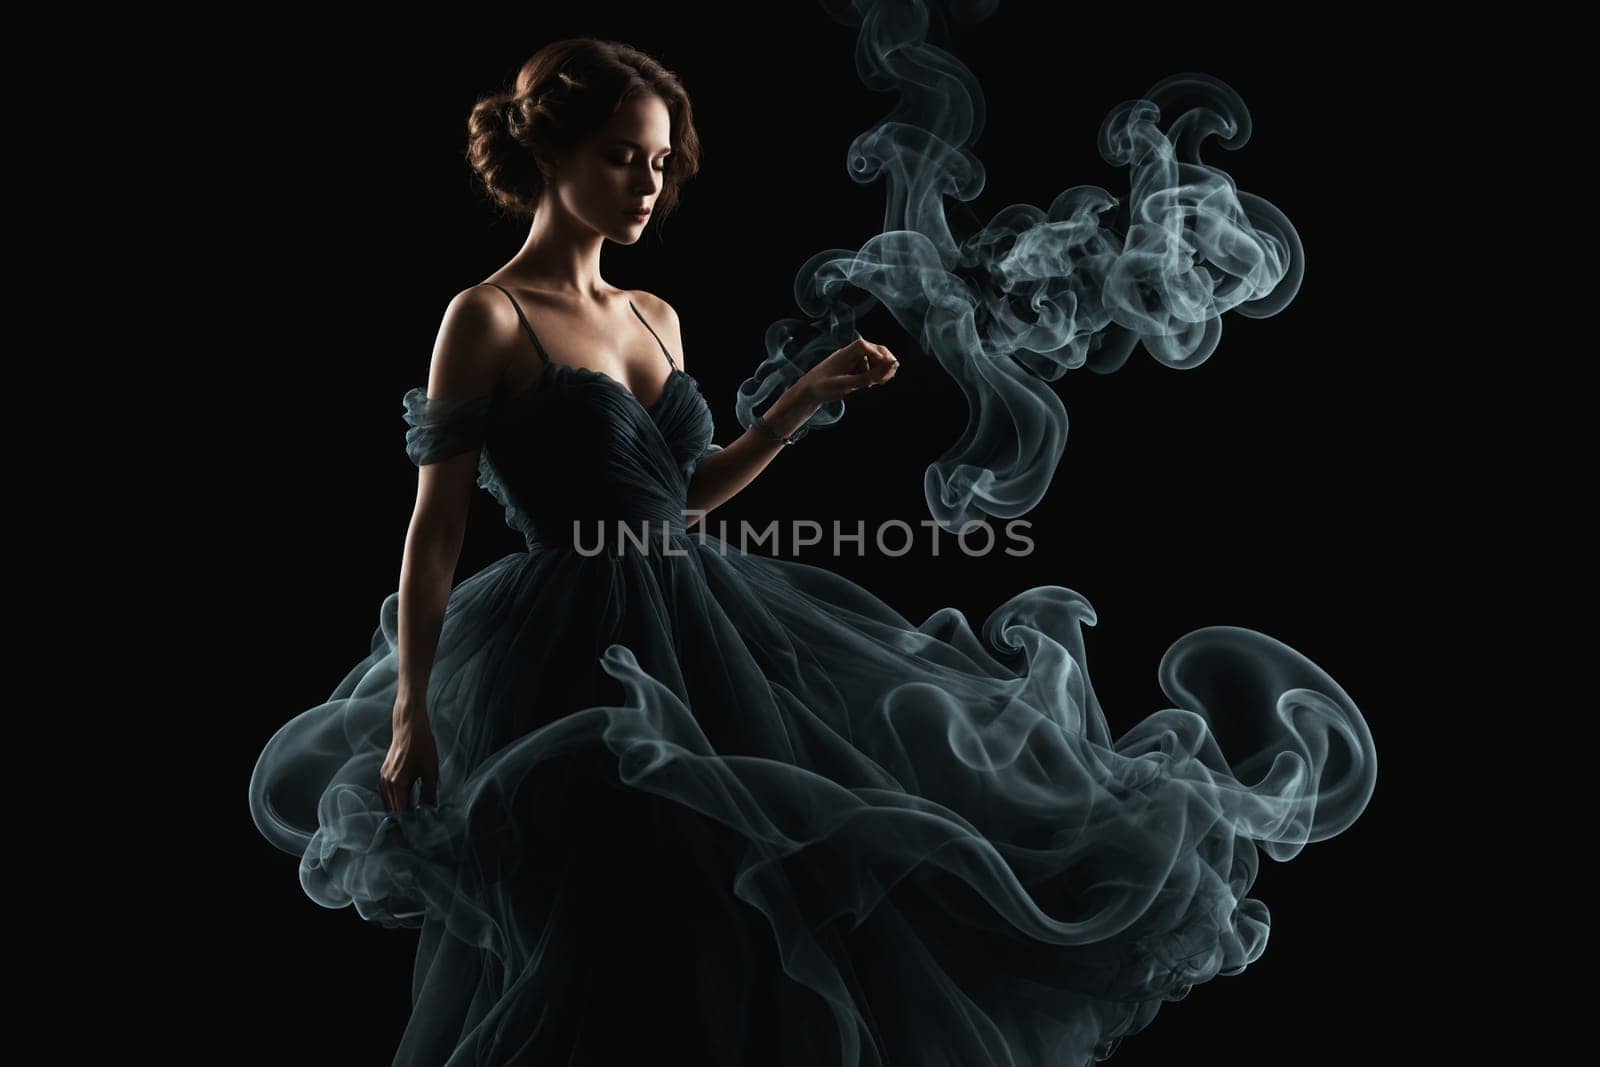 Embody the mystical in this beautiful image, capturing a poised figure enveloped in a dance of smoke and teal silk.